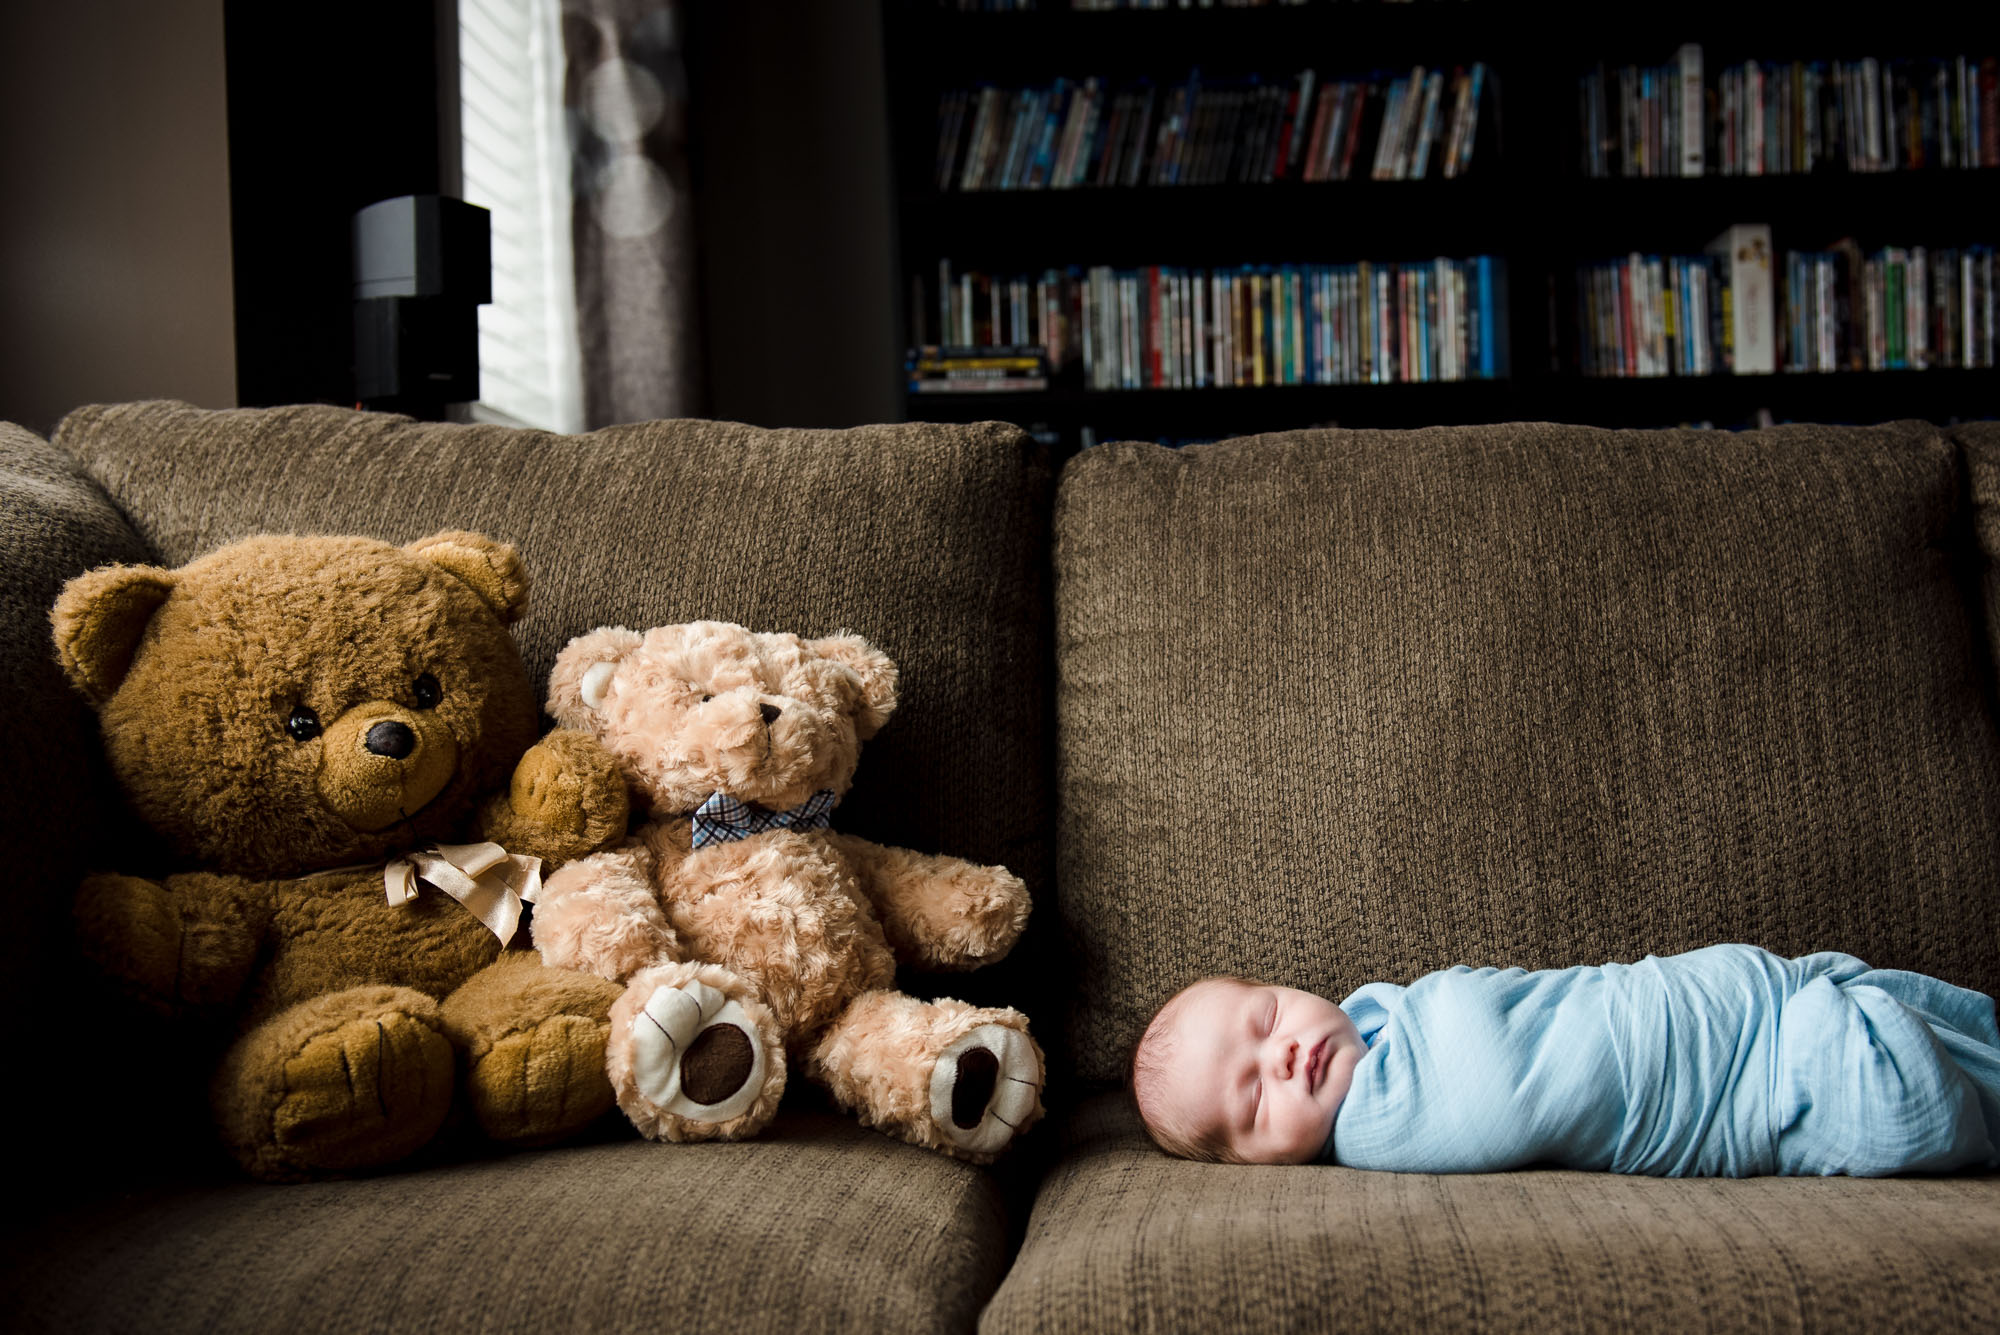 A baby lays next to vintage teddy bears during an Edmonton newborn photo session